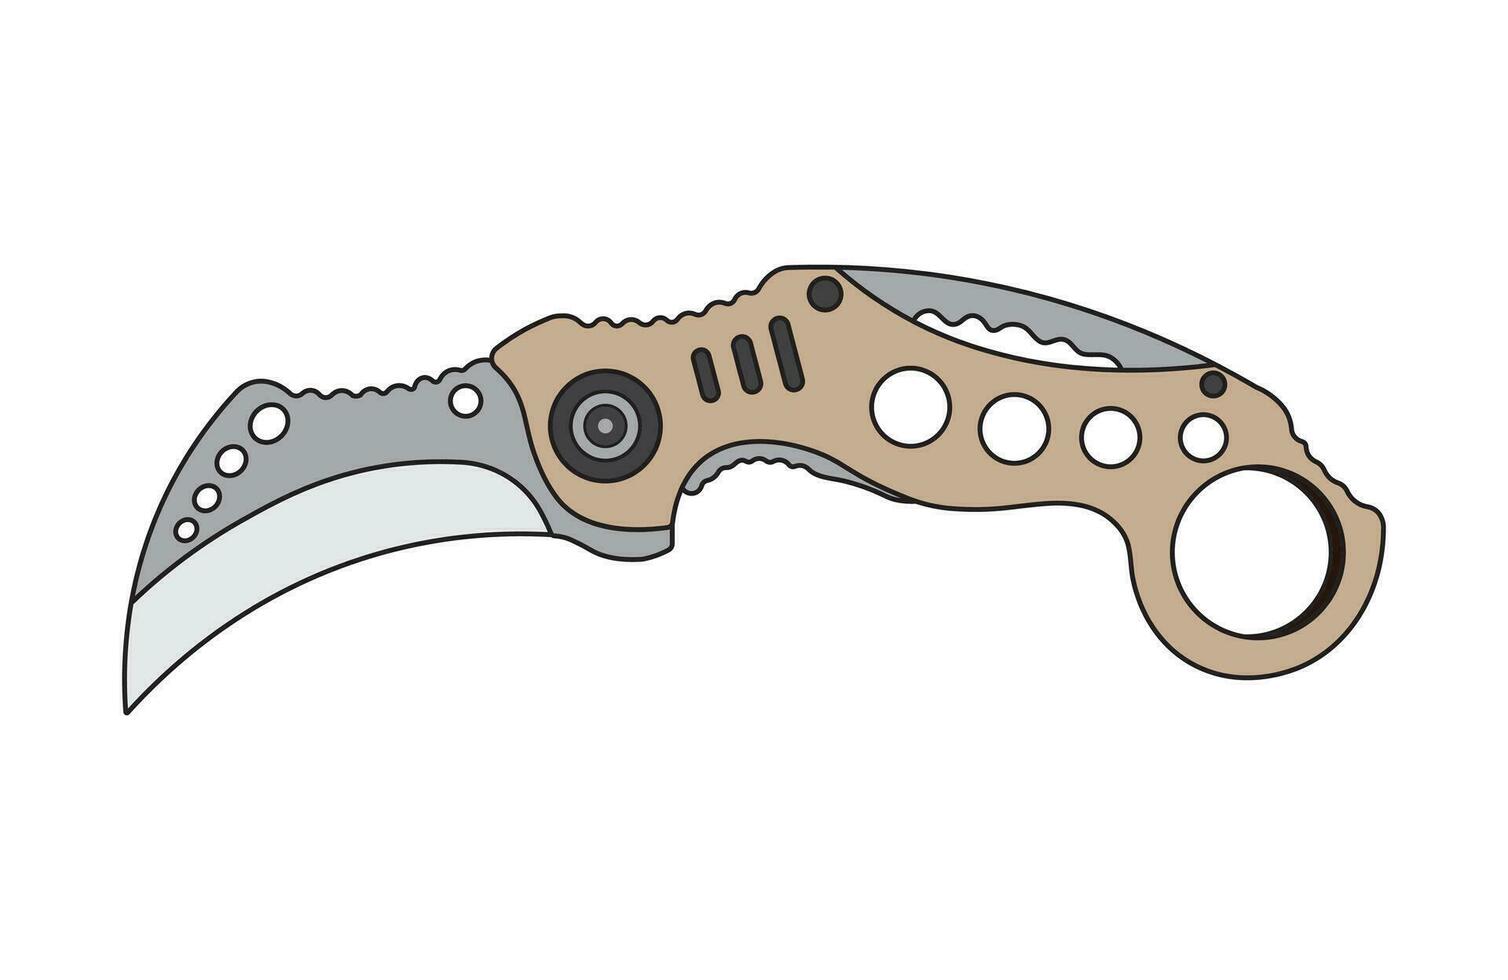 Kids drawing Cartoon Vector illustration karambit folding knife Isolated in doodle style